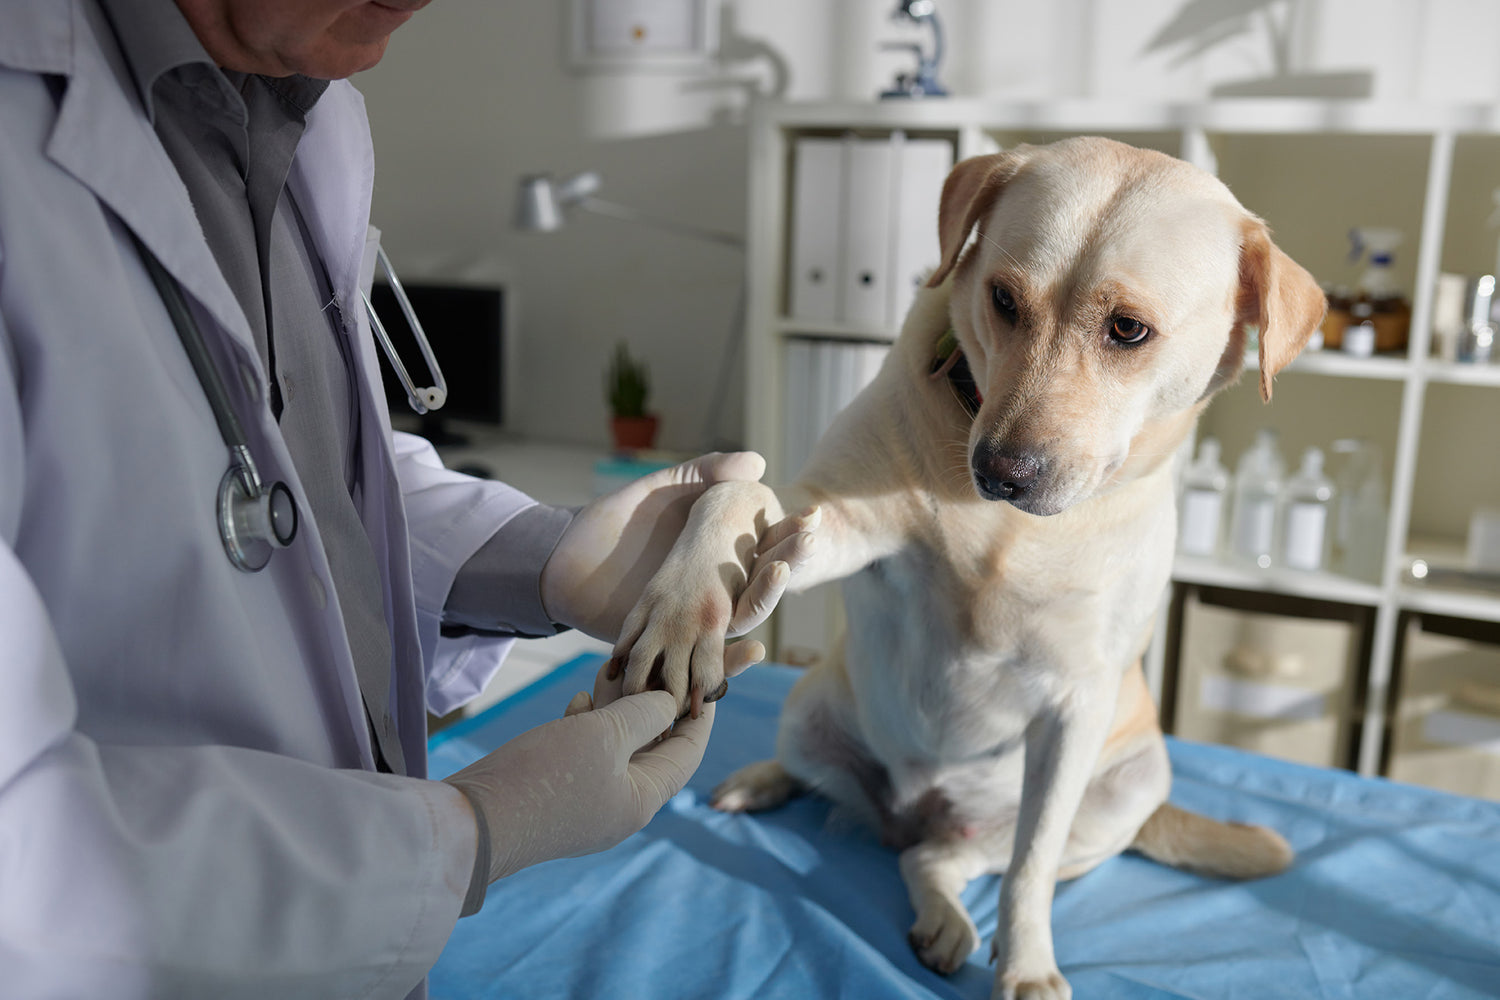 Can You Use Neosporin on Dogs?